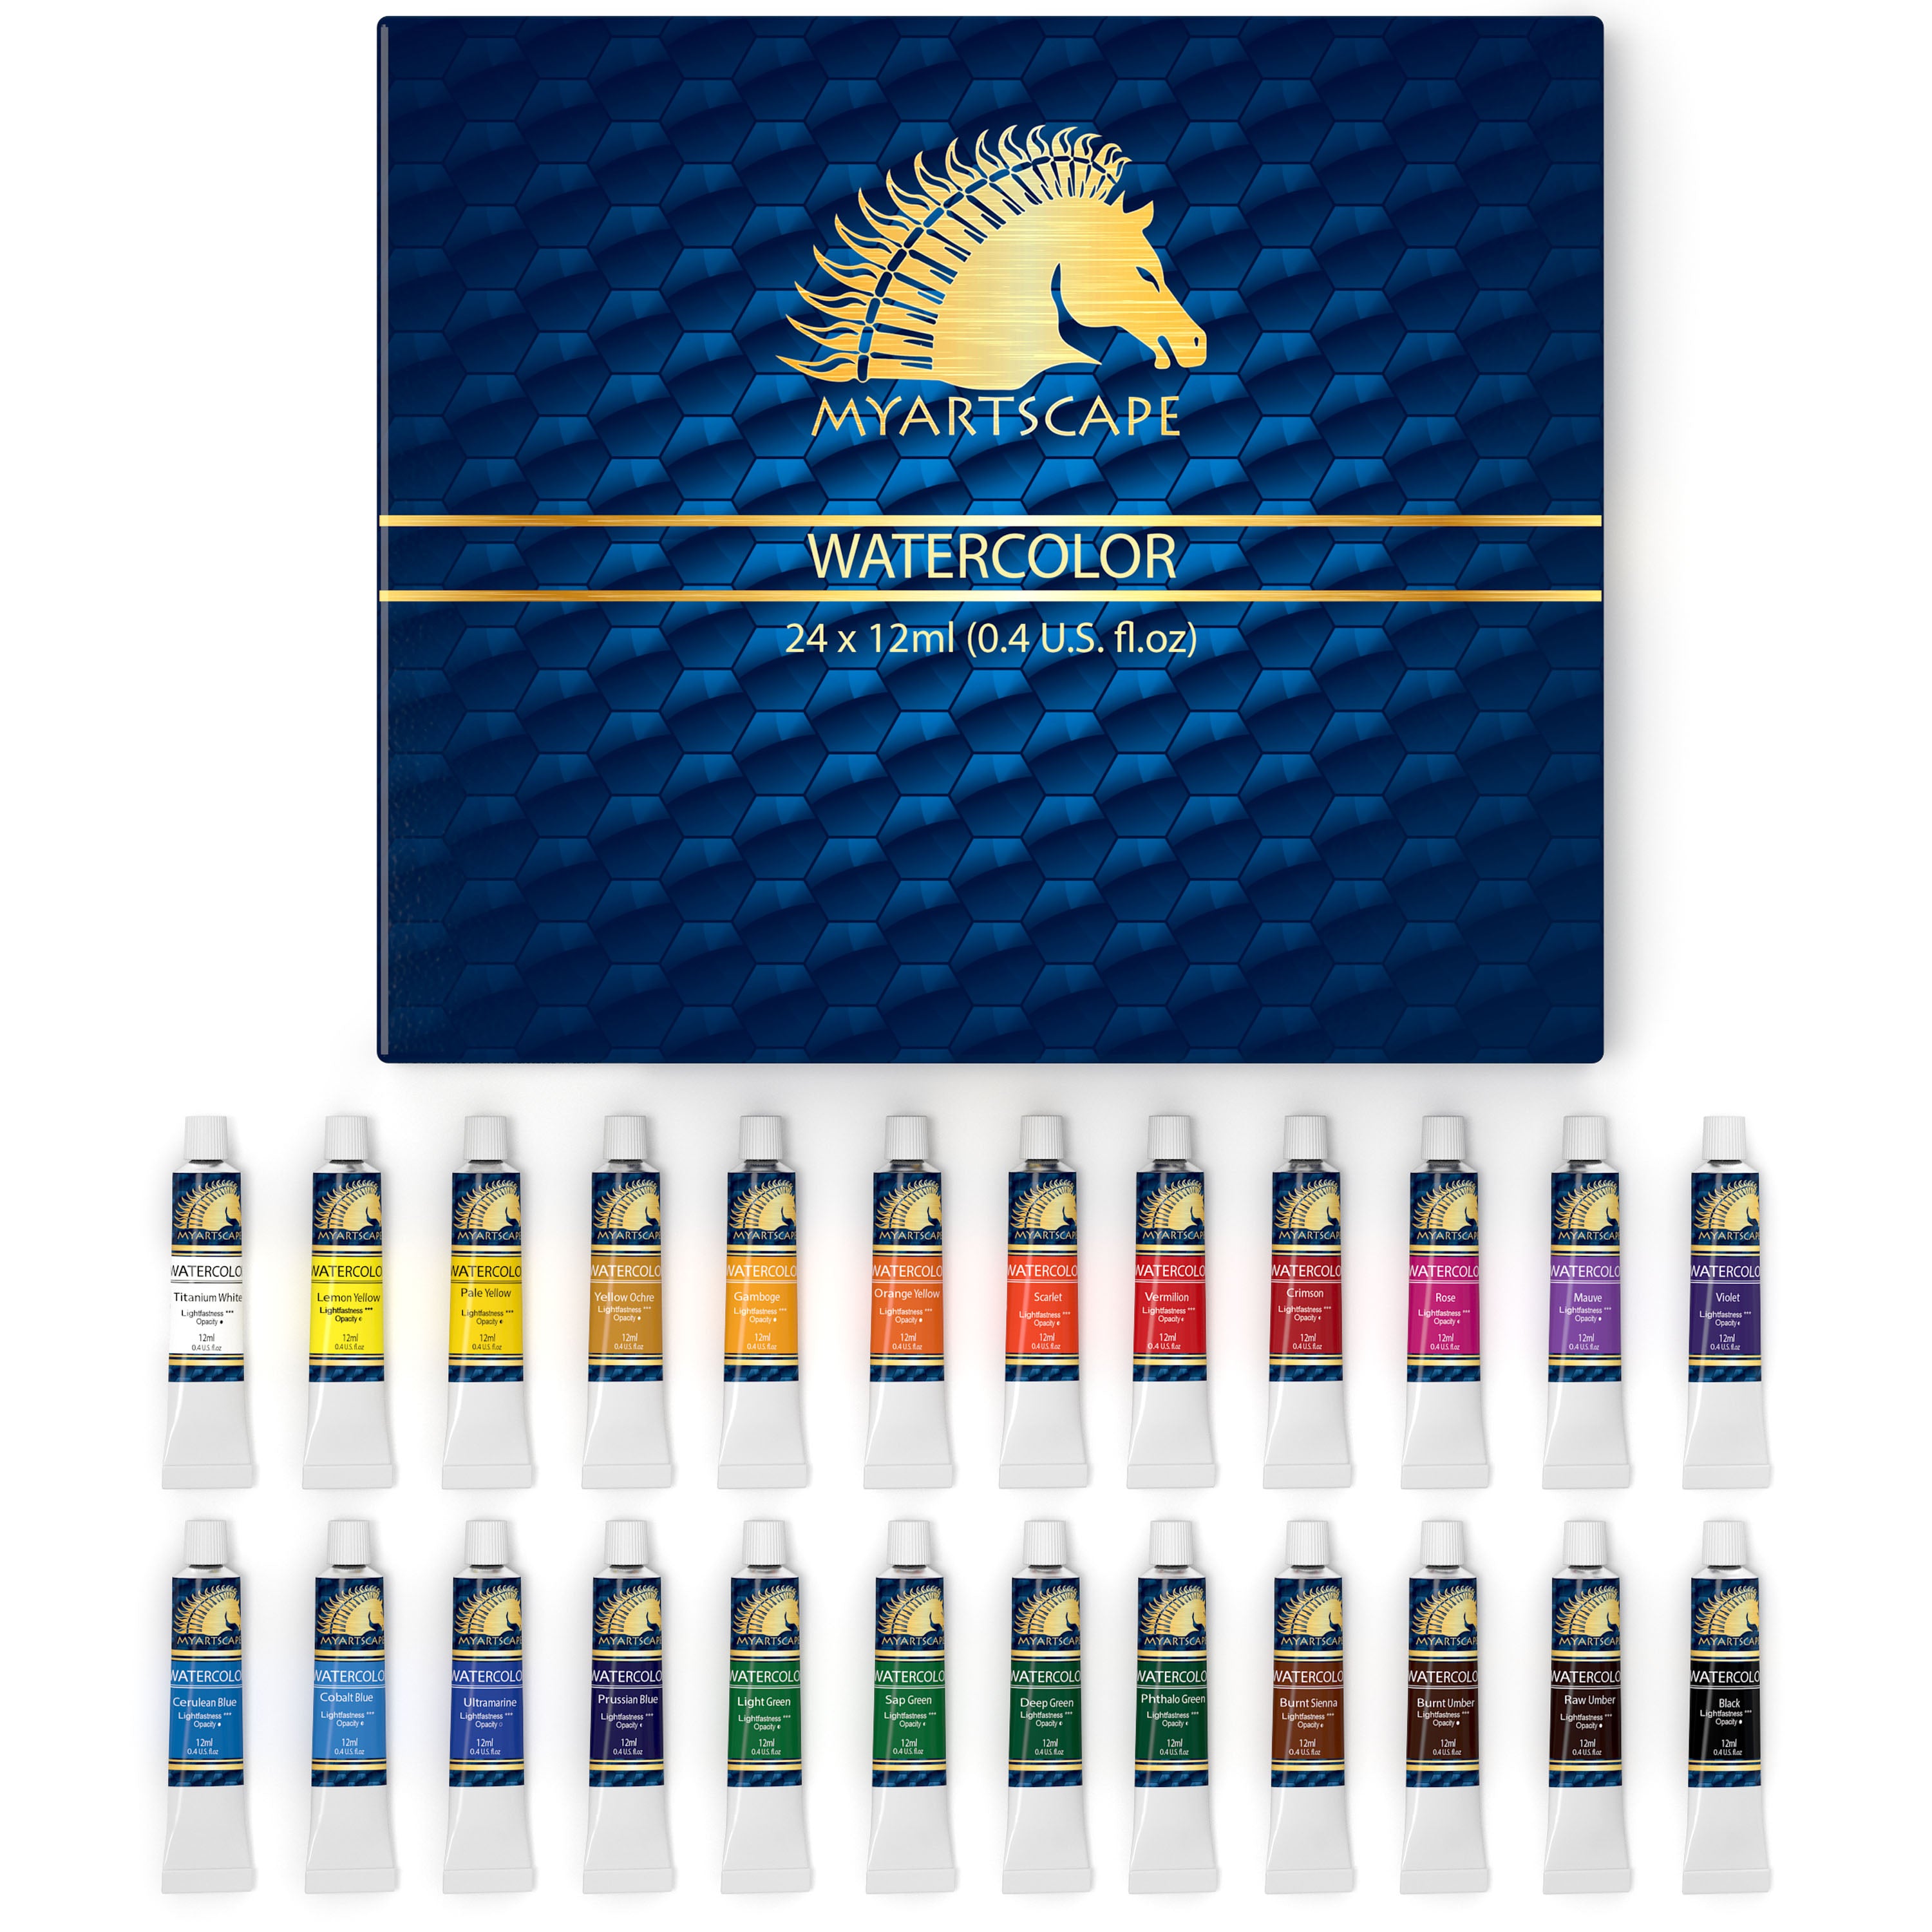  Daler Rowney Simply Watercolor Set - 24 Watercolor Paint Tubes  for Student Artists of All Ages - Vibrant Smooth 12ml Watercolor Paints for  Canvas Paper and More